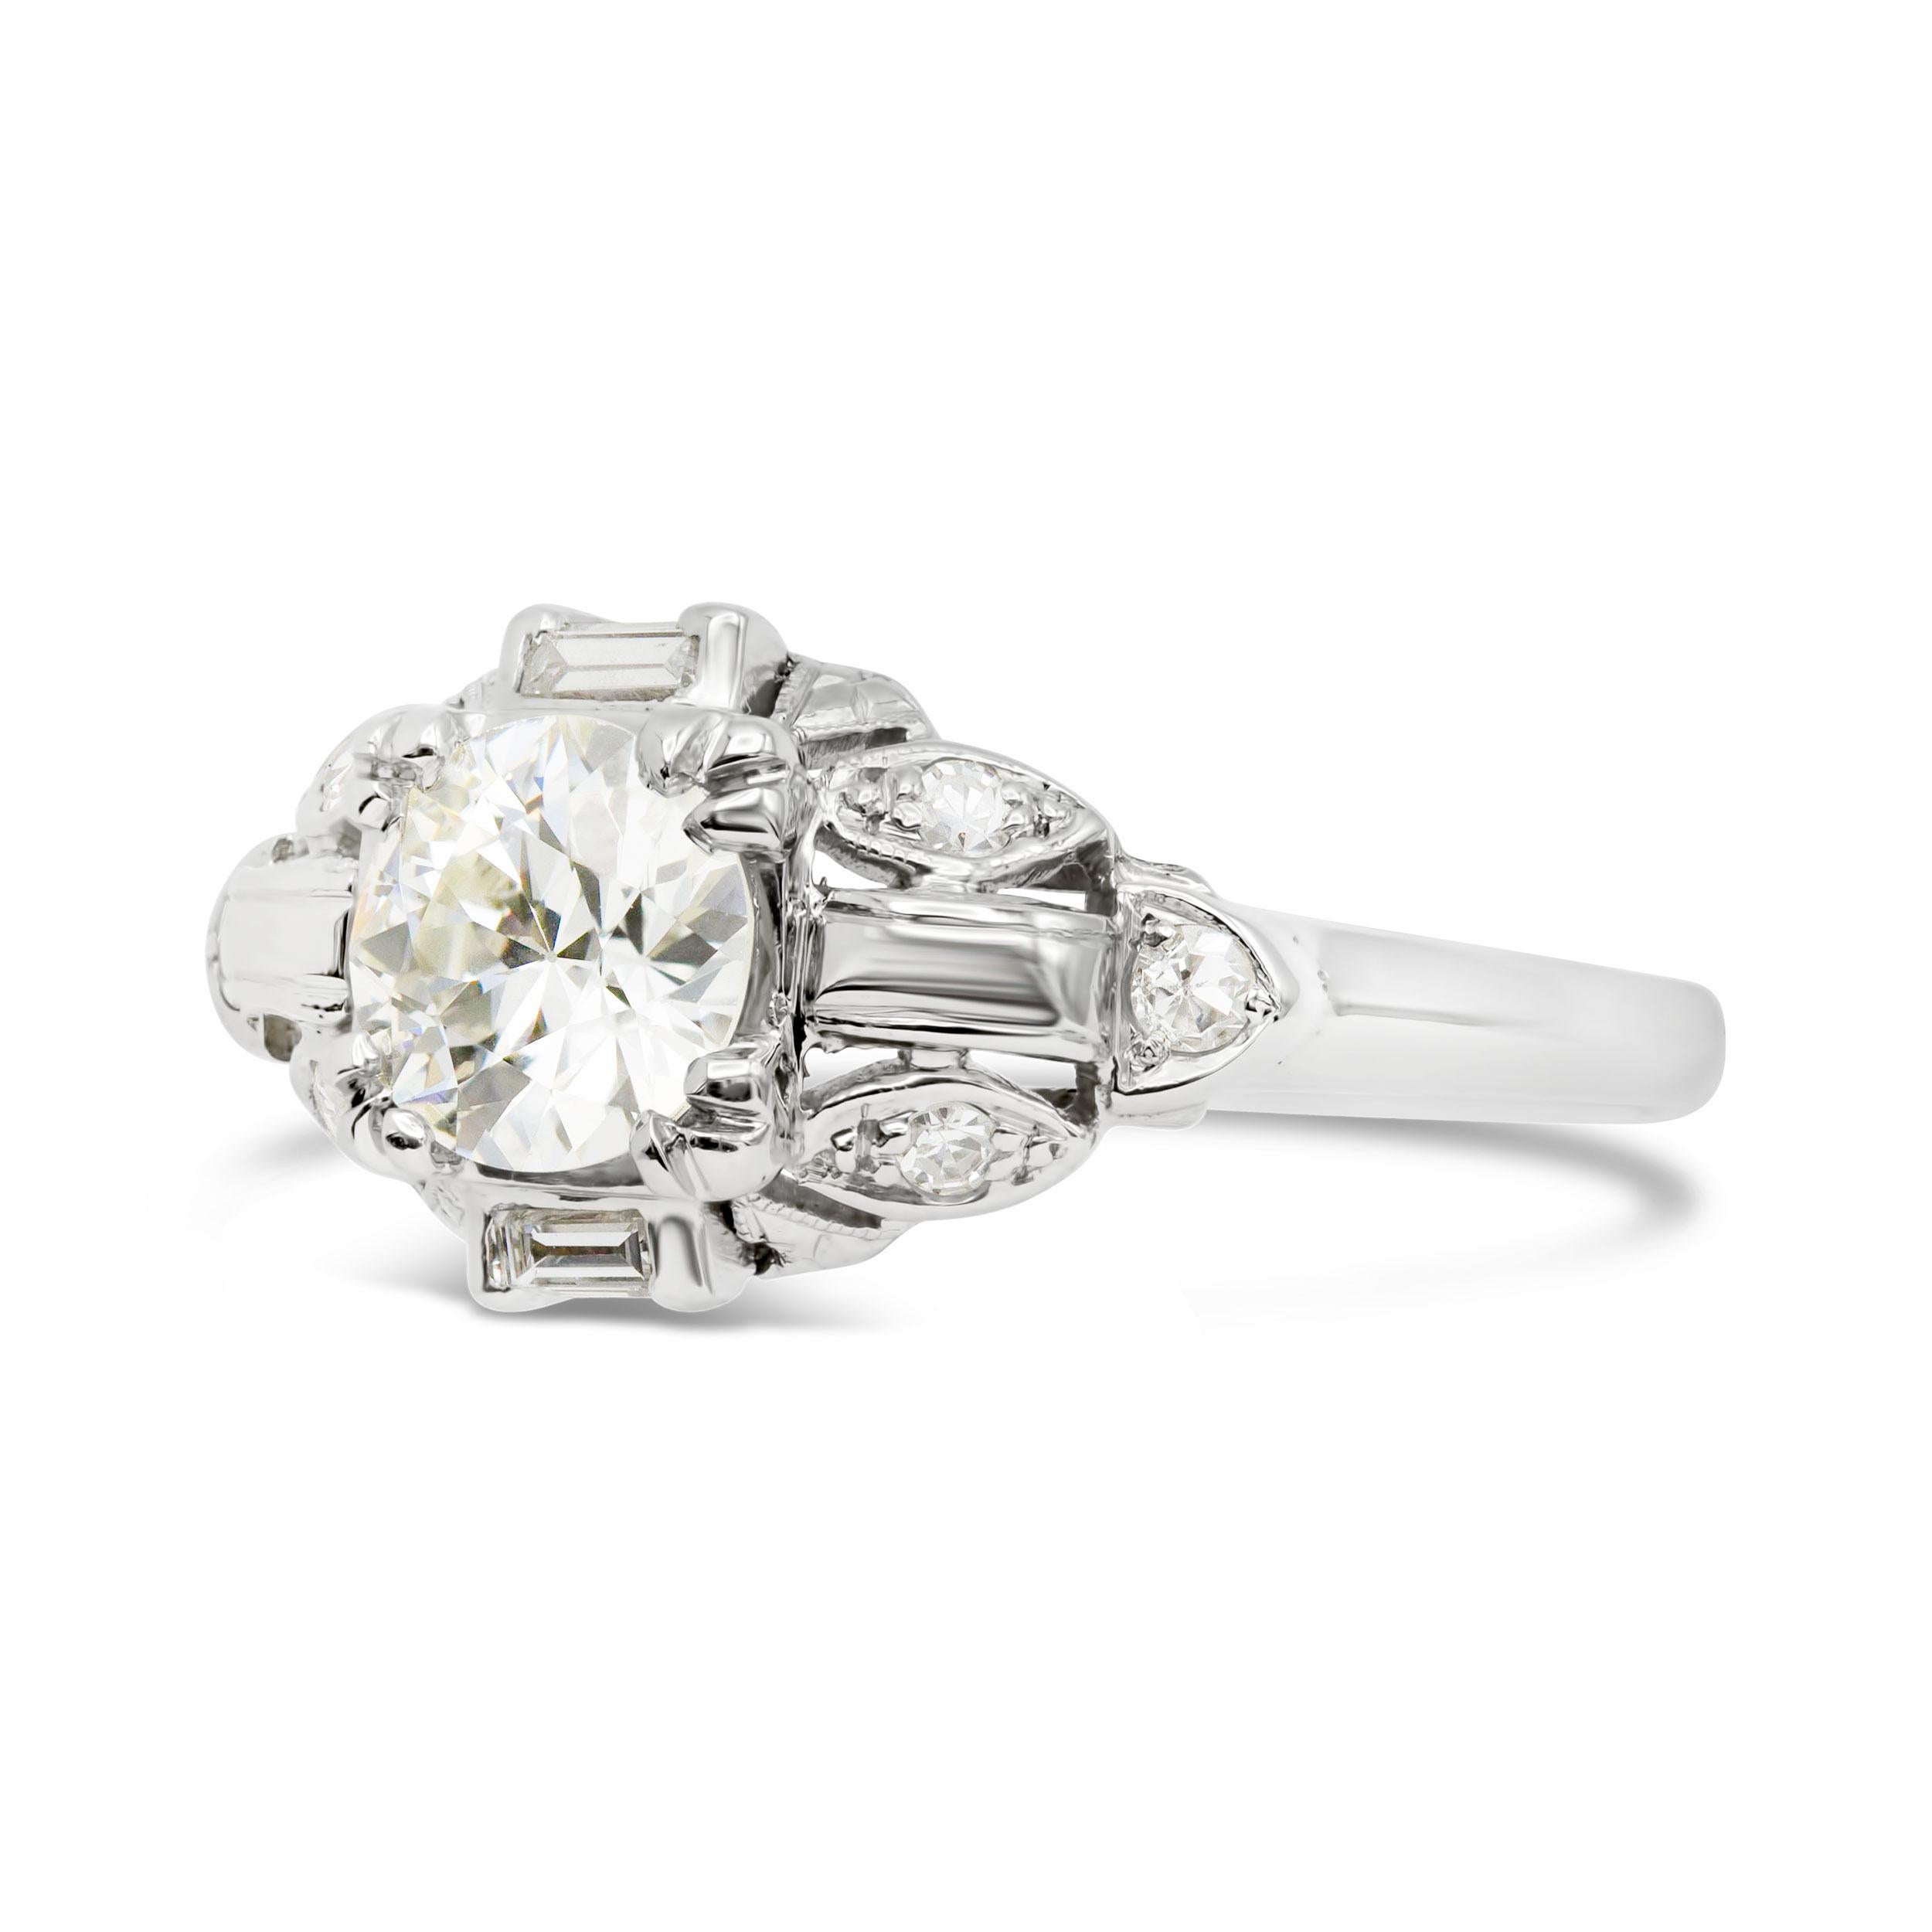 This charming thing! We love deco frame settings and this engagement ring has so much character. The center 0.82 carat old European cut diamond, certified K VS2 by GIA, is fiery and sparkles like crazy on the hand. Accenting single cuts and straight